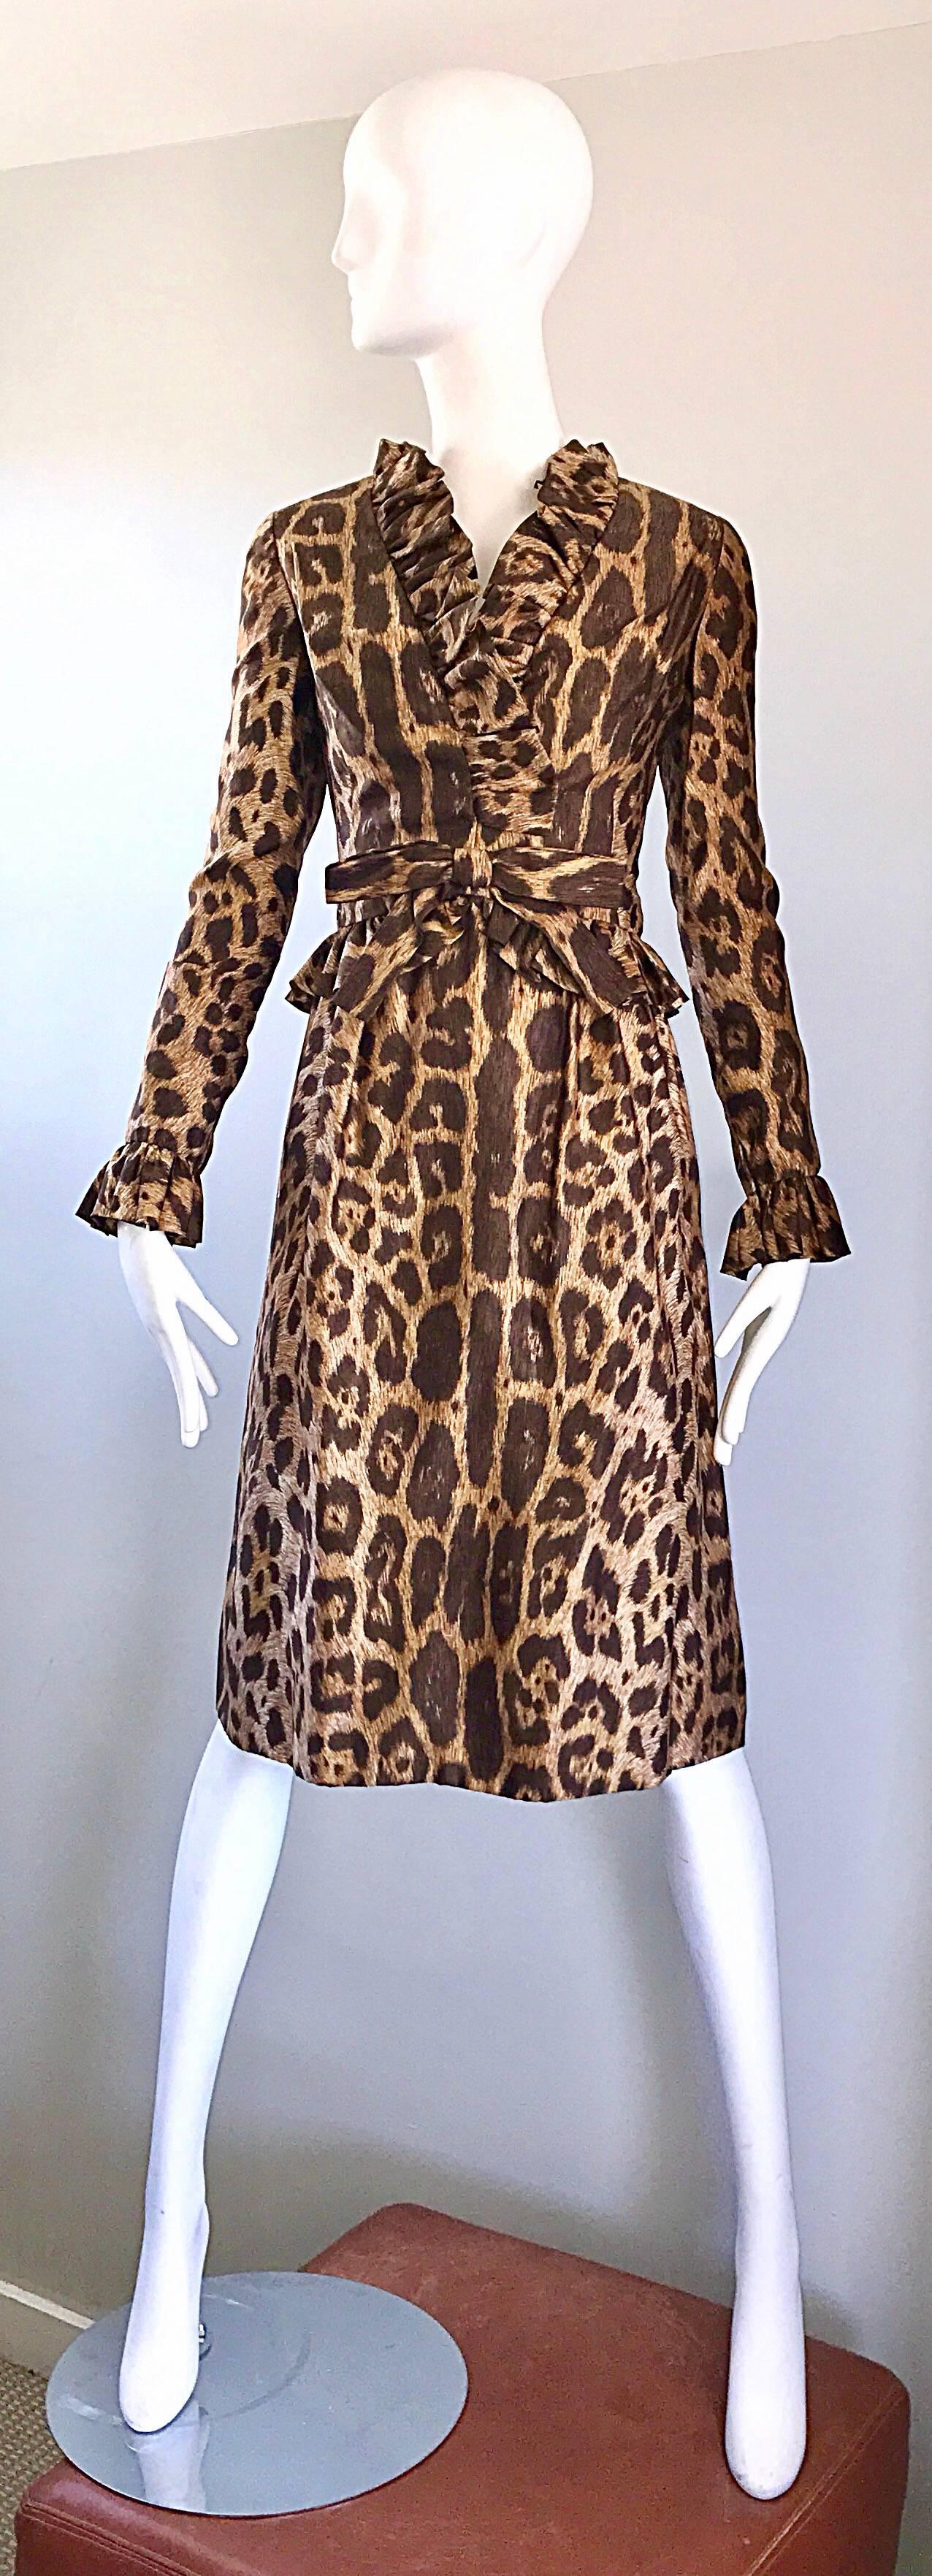 Chic 1960s MOLLIE PARNIS leopard cheetah print long sleeve silk A-Line dress! Fitted bodice with a flattering full skirt. Ruffles at collar, waist, and each sleeve cuff. Bow at center waist. Full metal zipper up the back with            hook-and-eye